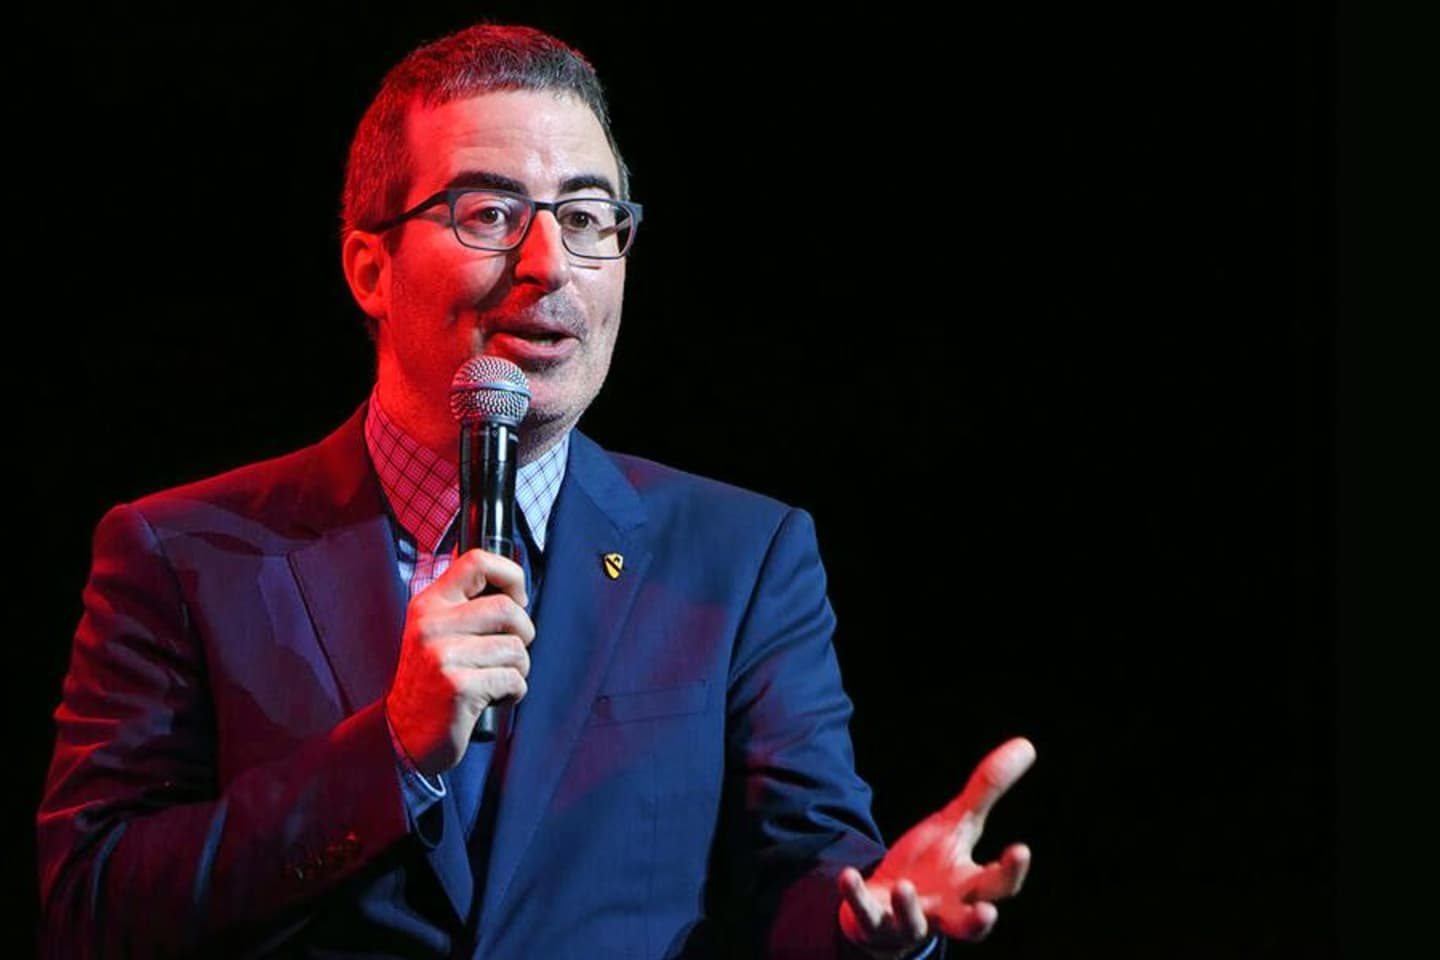 John Oliver Tickets Buy or Sell Tickets for John Oliver Tour Dates